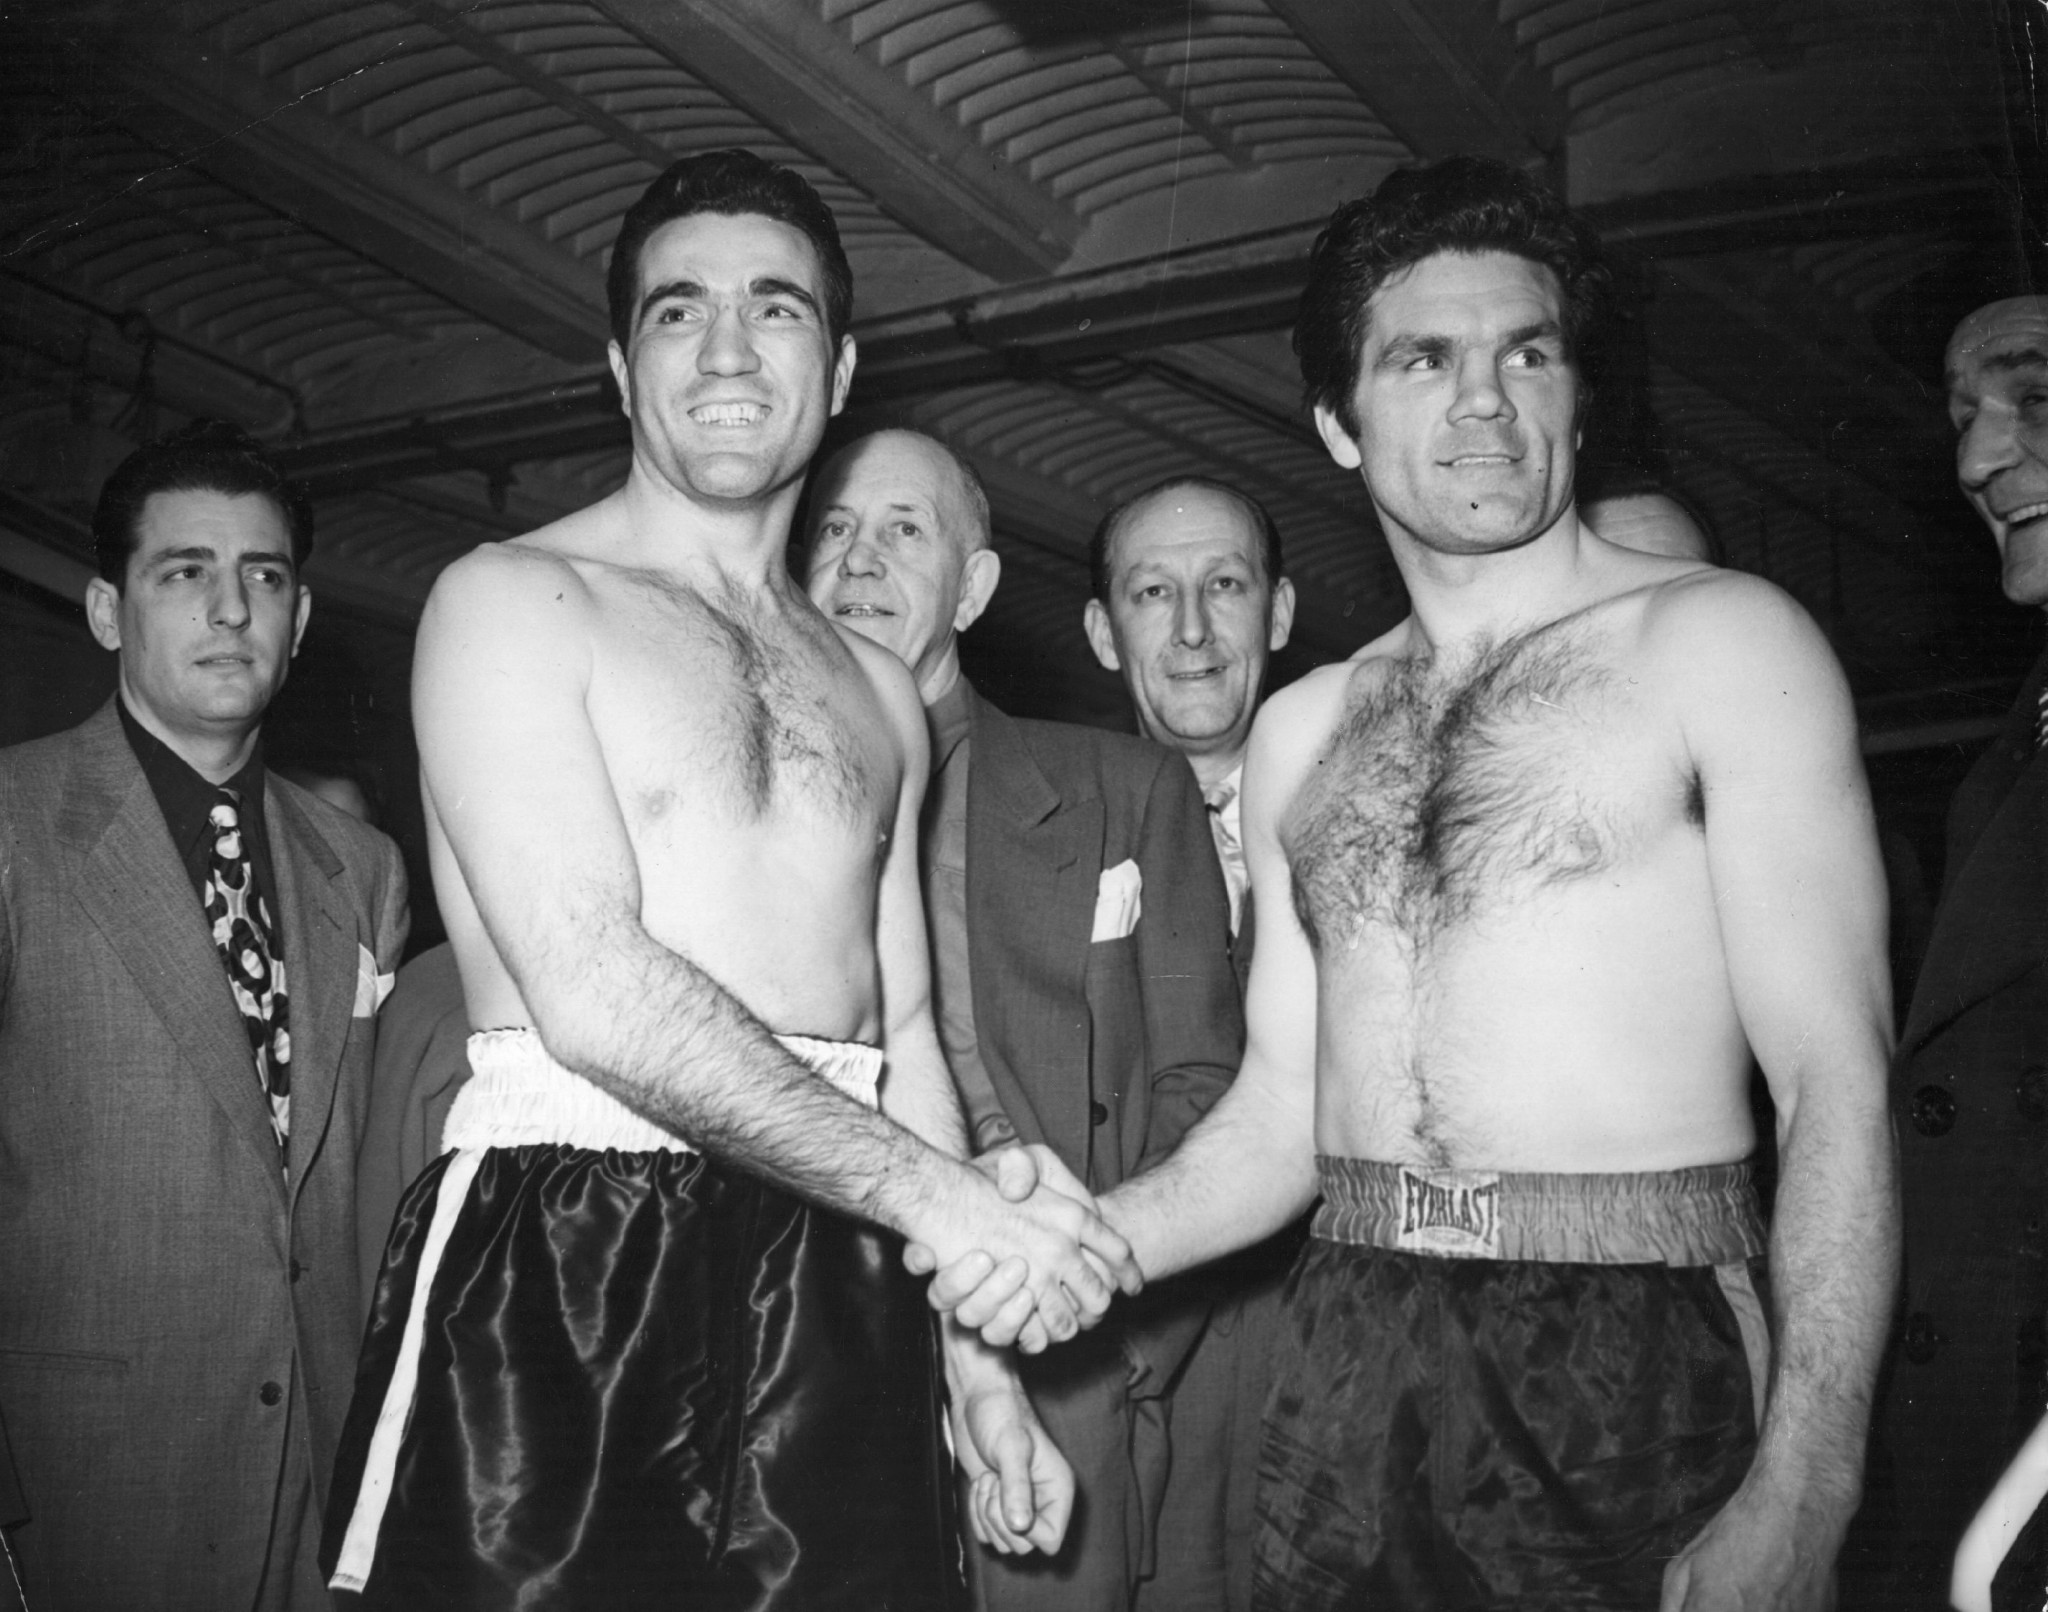 British heavyweight boxing champion Freddie Mills shaking hands with his opponent Joe Maxim ©Getty Images